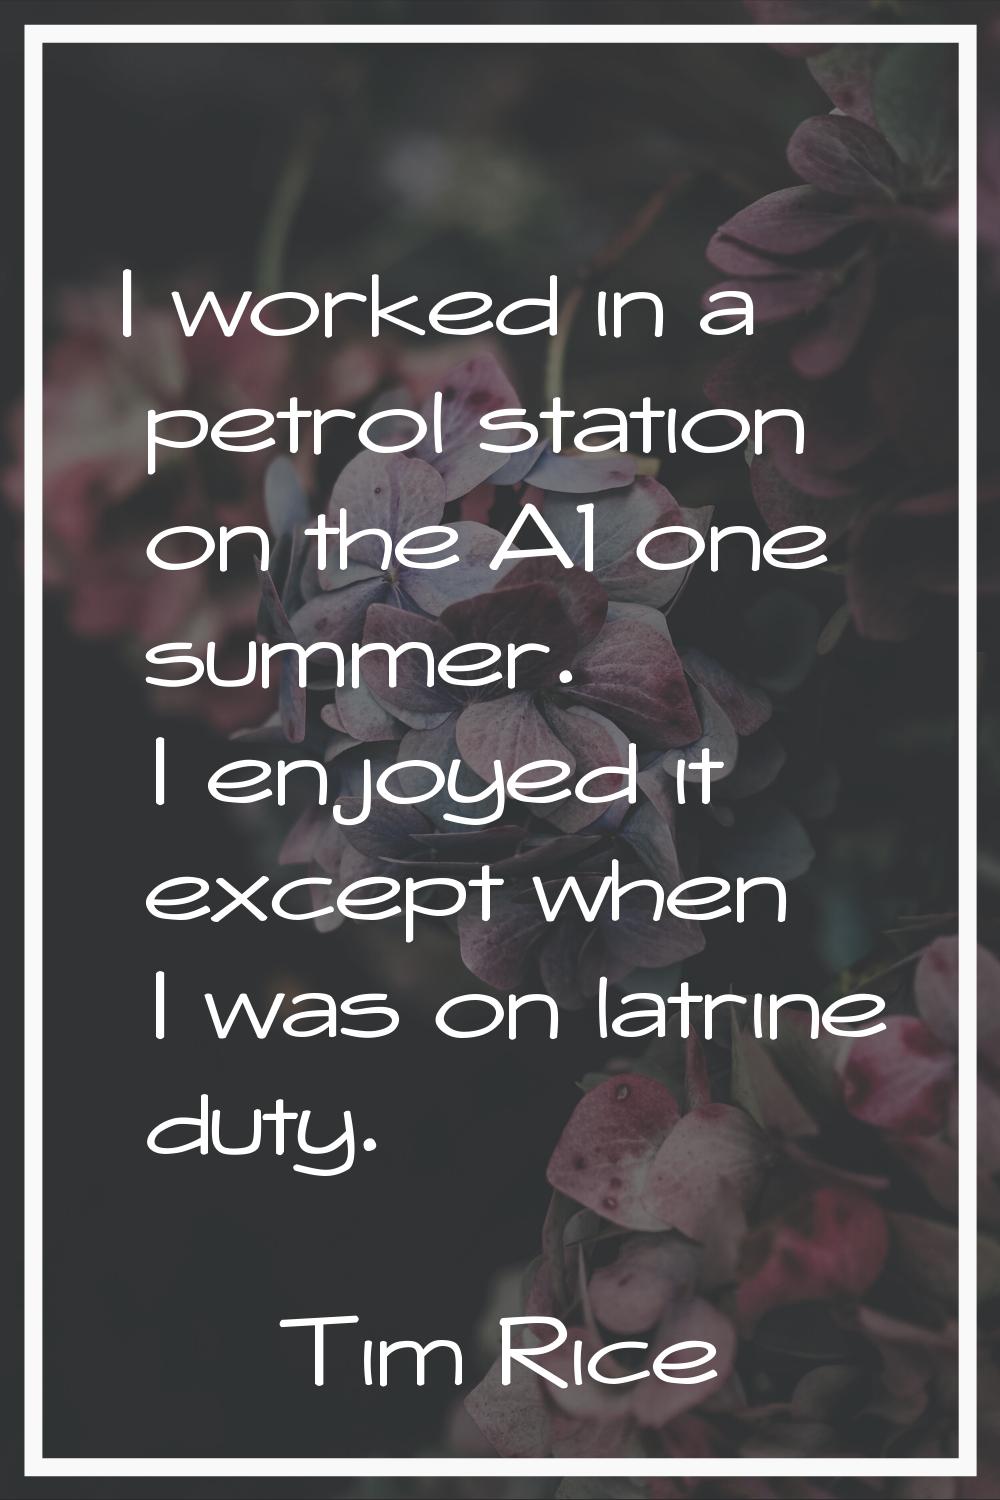 I worked in a petrol station on the A1 one summer. I enjoyed it except when I was on latrine duty.